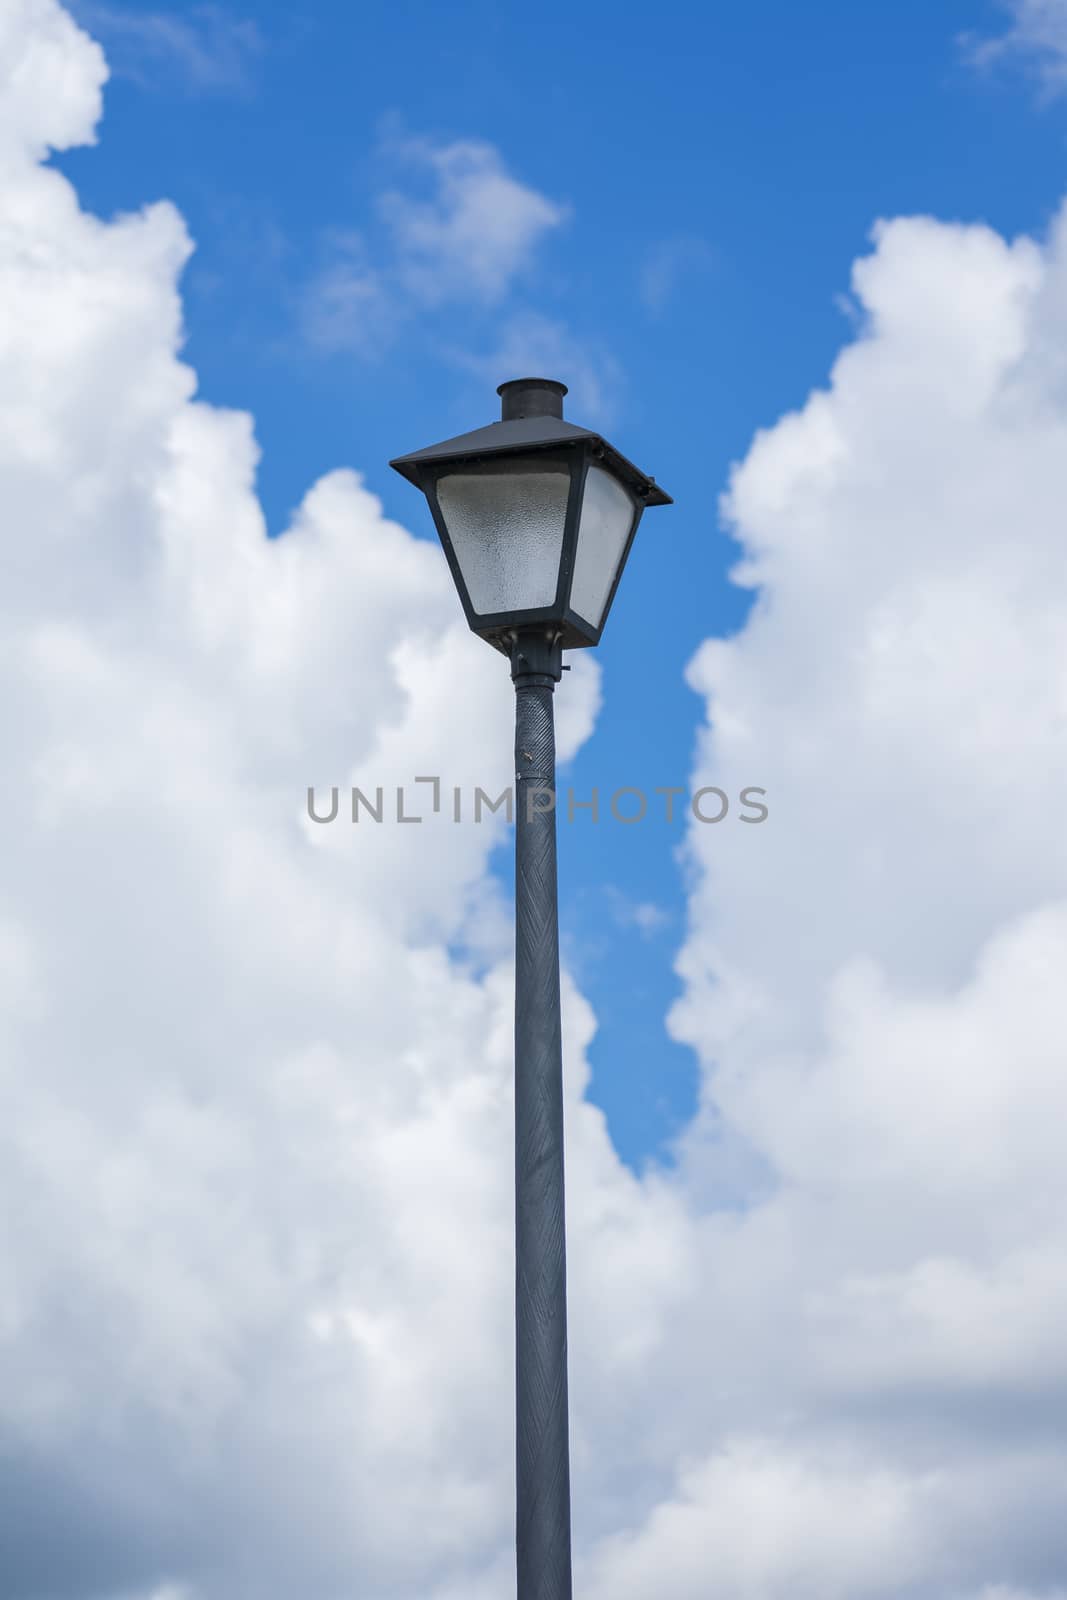 Vertical shot of a lamppost against a blue cloudy sky.